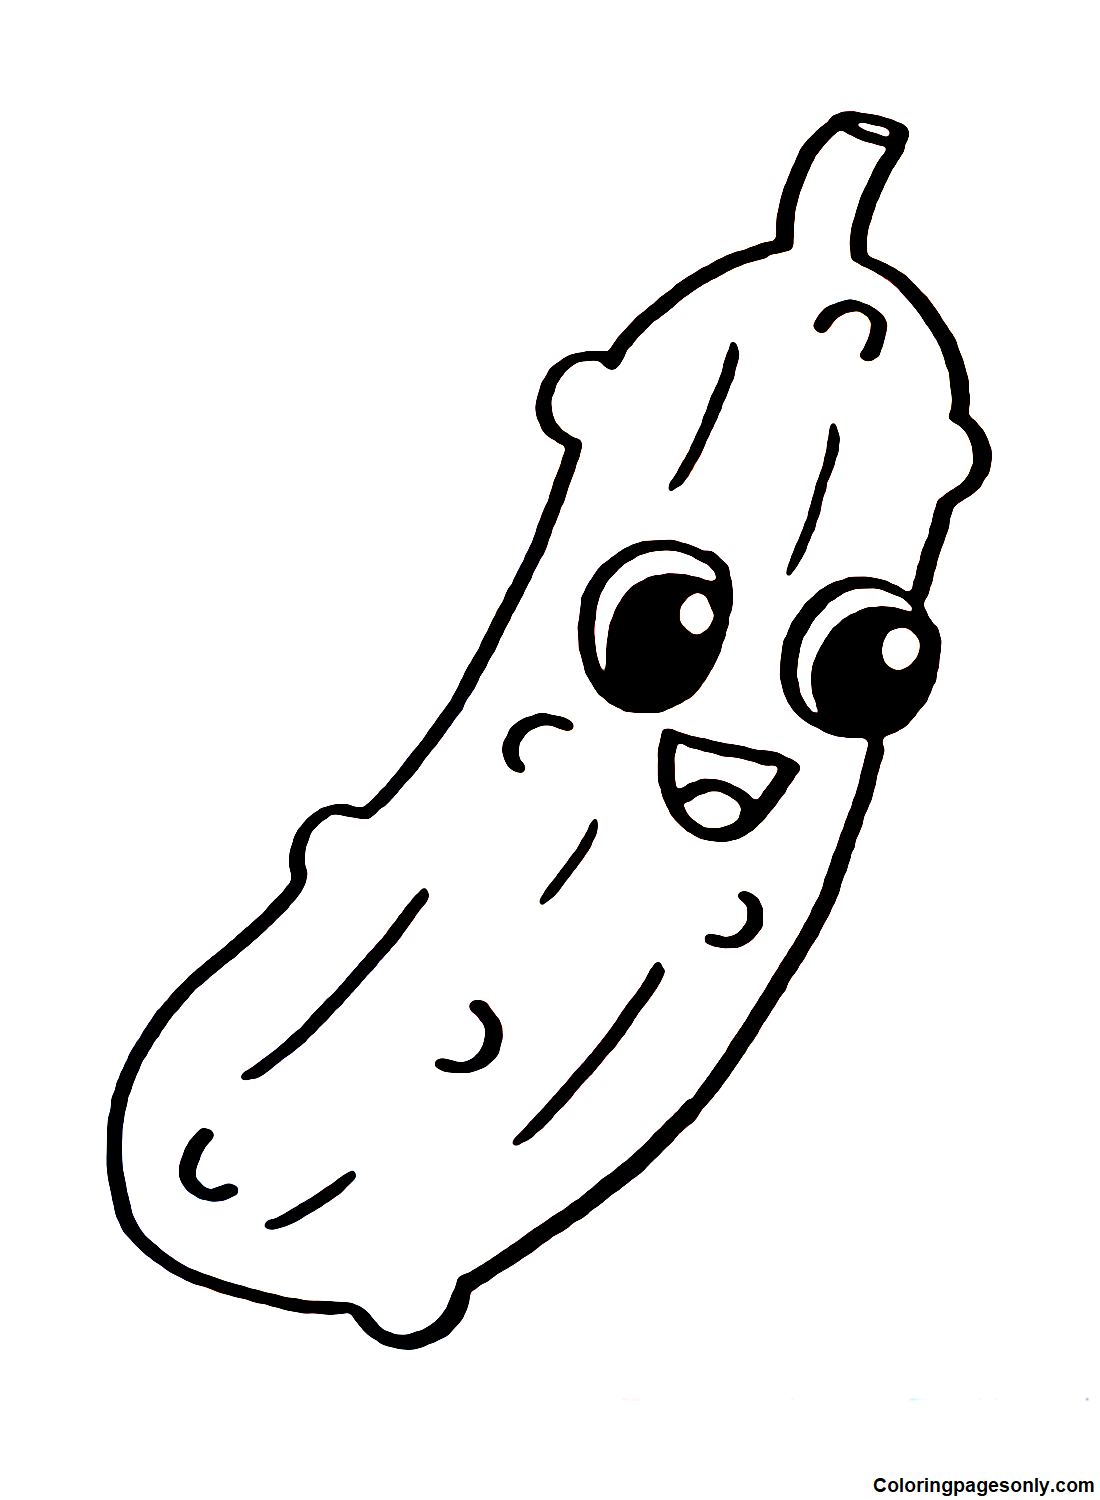 Cucumber for Kids Coloring Page